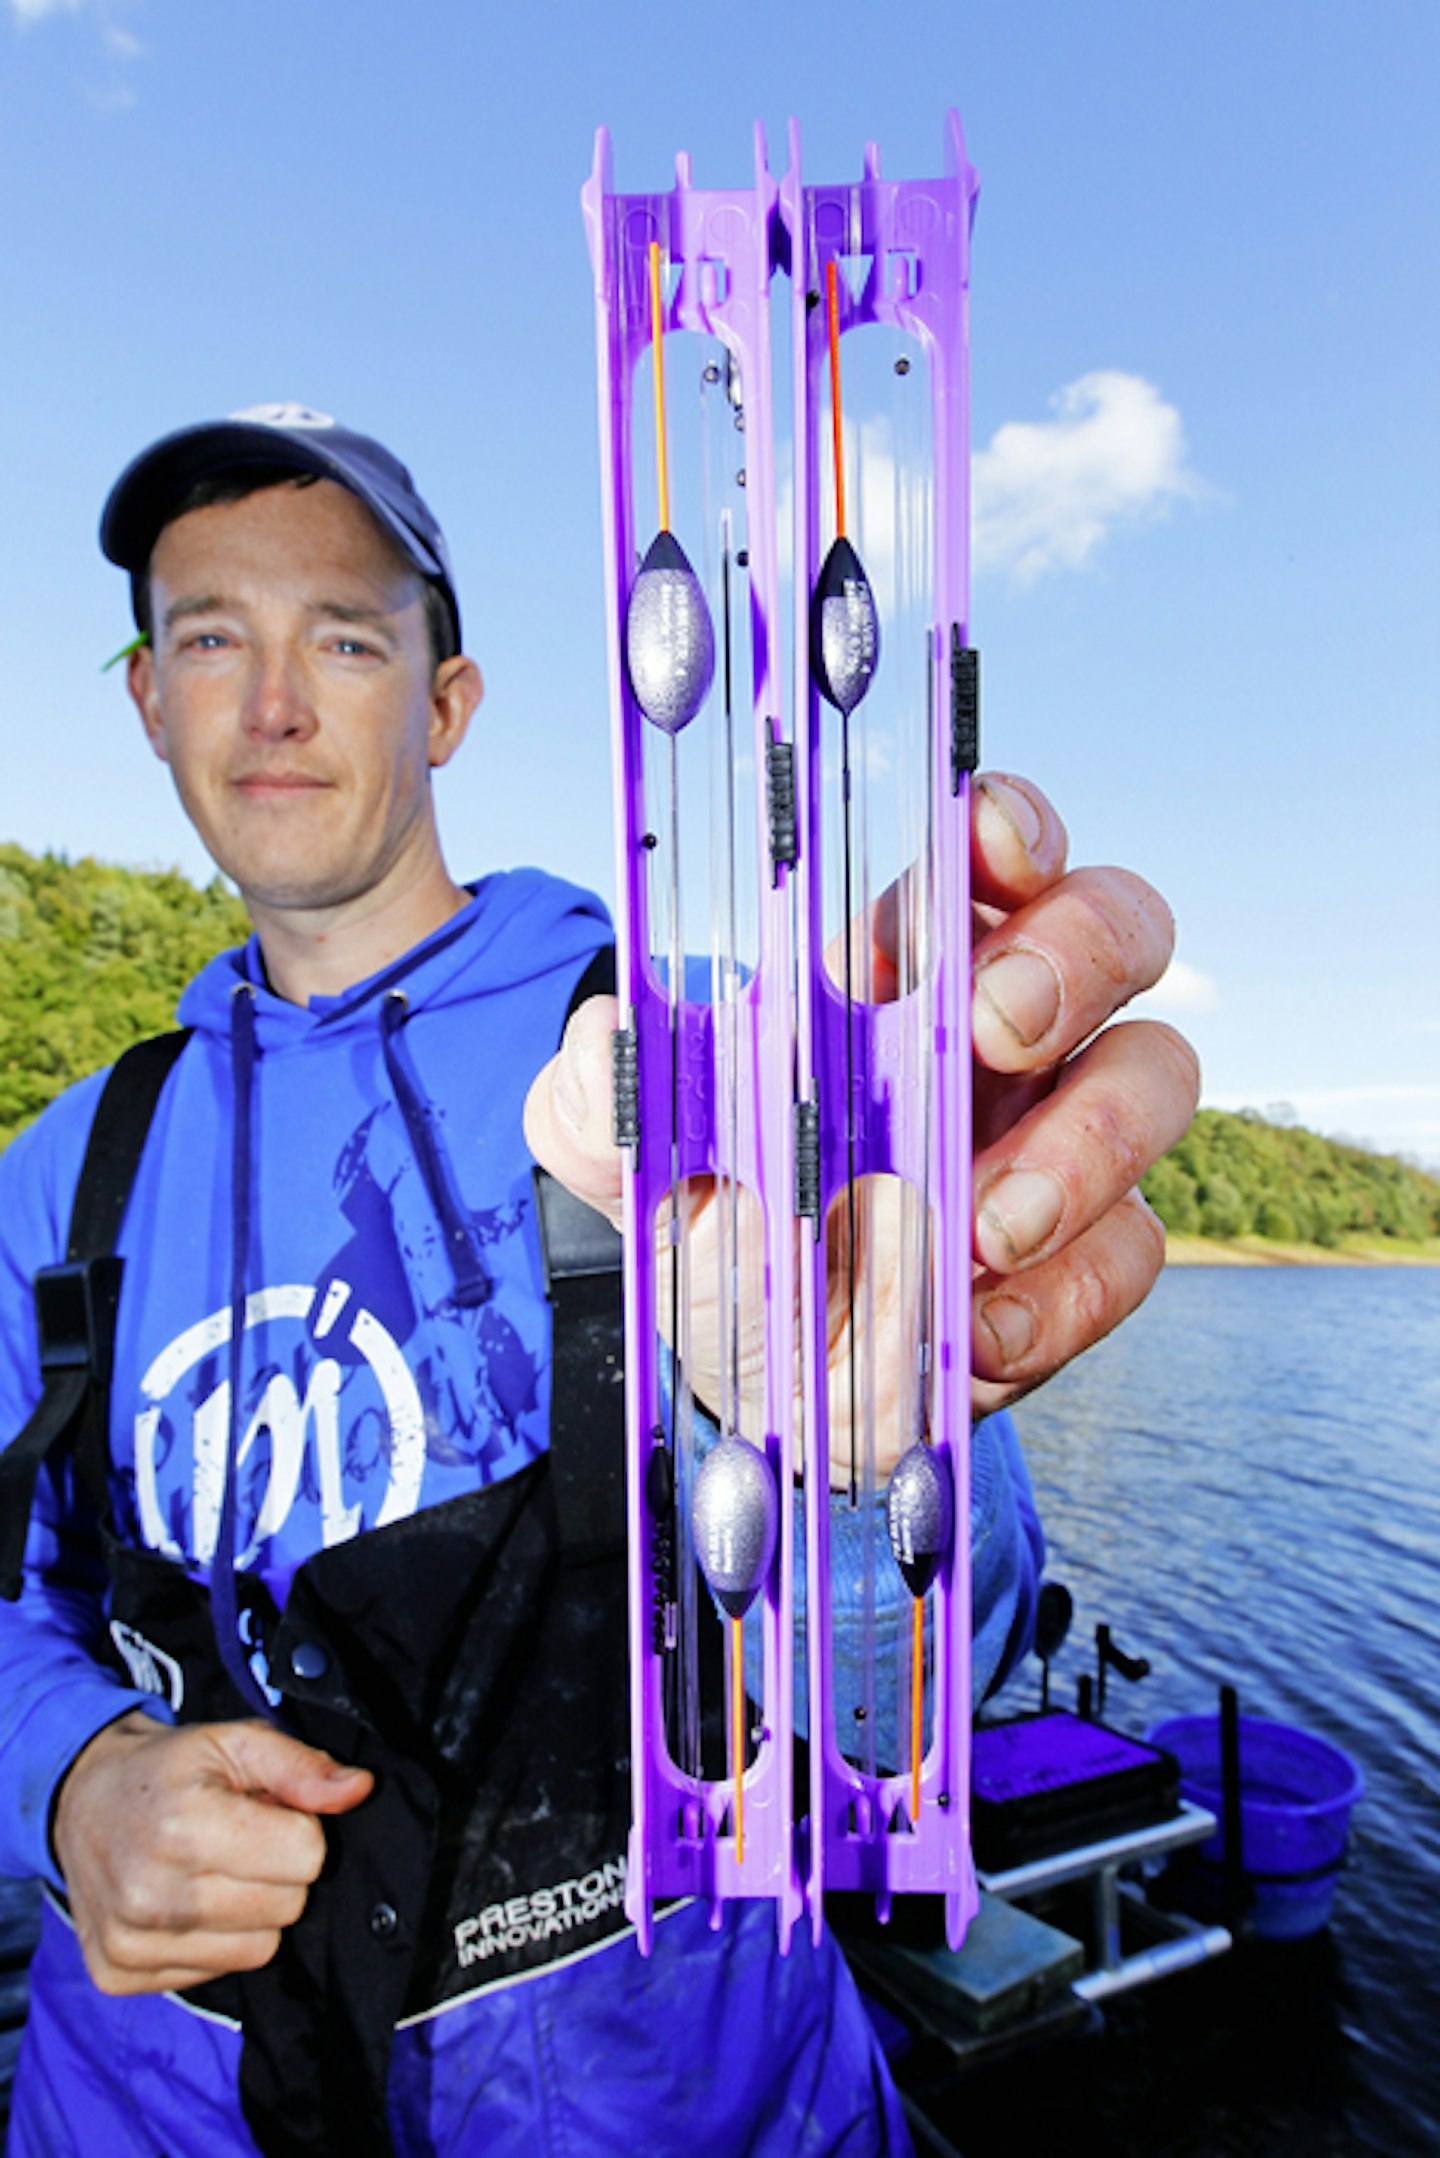 Lee set up a number of large rugby ball-shaped pole rigs to combat strong winds and undertow. 